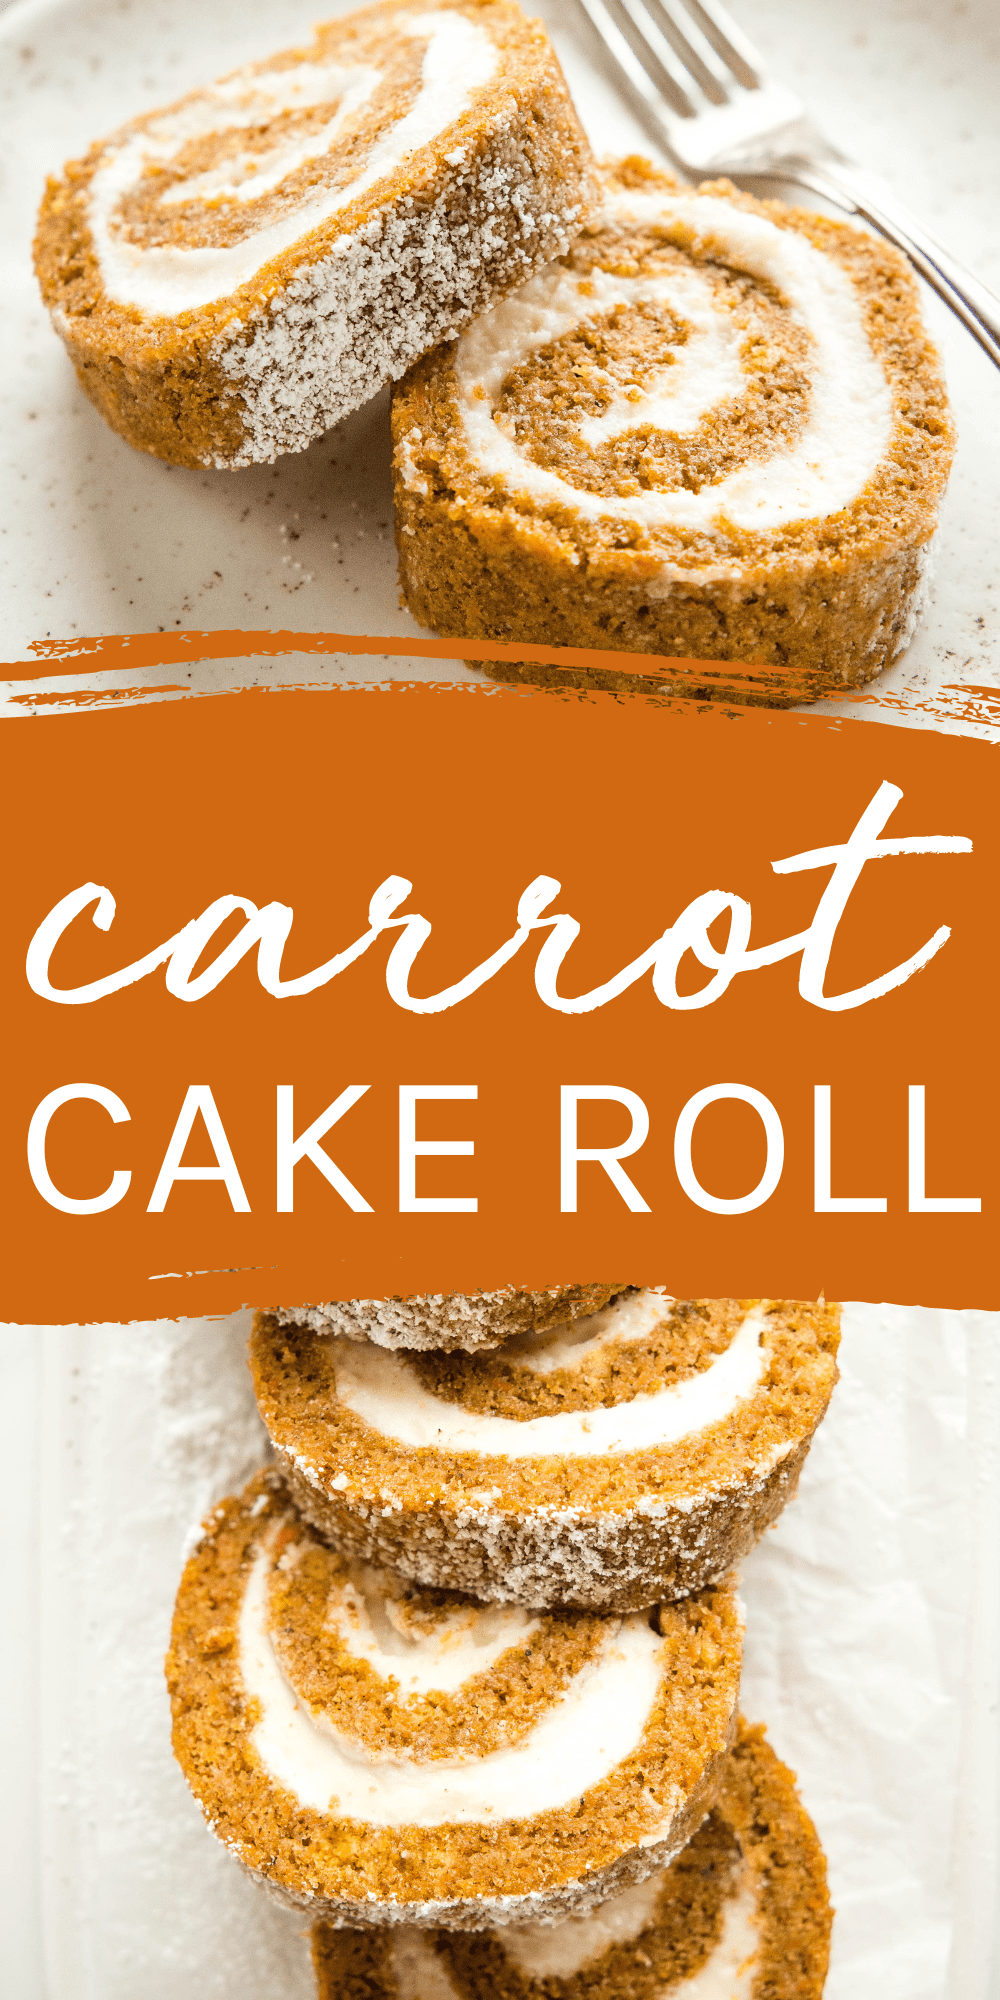 This Carrot Cake Roll recipe is the perfect spring dessert - a moist and tender carrot sponge cake with cinnamon and spice, filled with a soft and fluffy cream cheese frosting. Recipe from thebusybaker.ca! #carrotcakeroll #howtomakecarrotcake #carrotcakerollrecipe #carrotcakerecipe #rollcake #swissroll #easter #easterdessert #springdessert #creamcheesefrosting via @busybakerblog